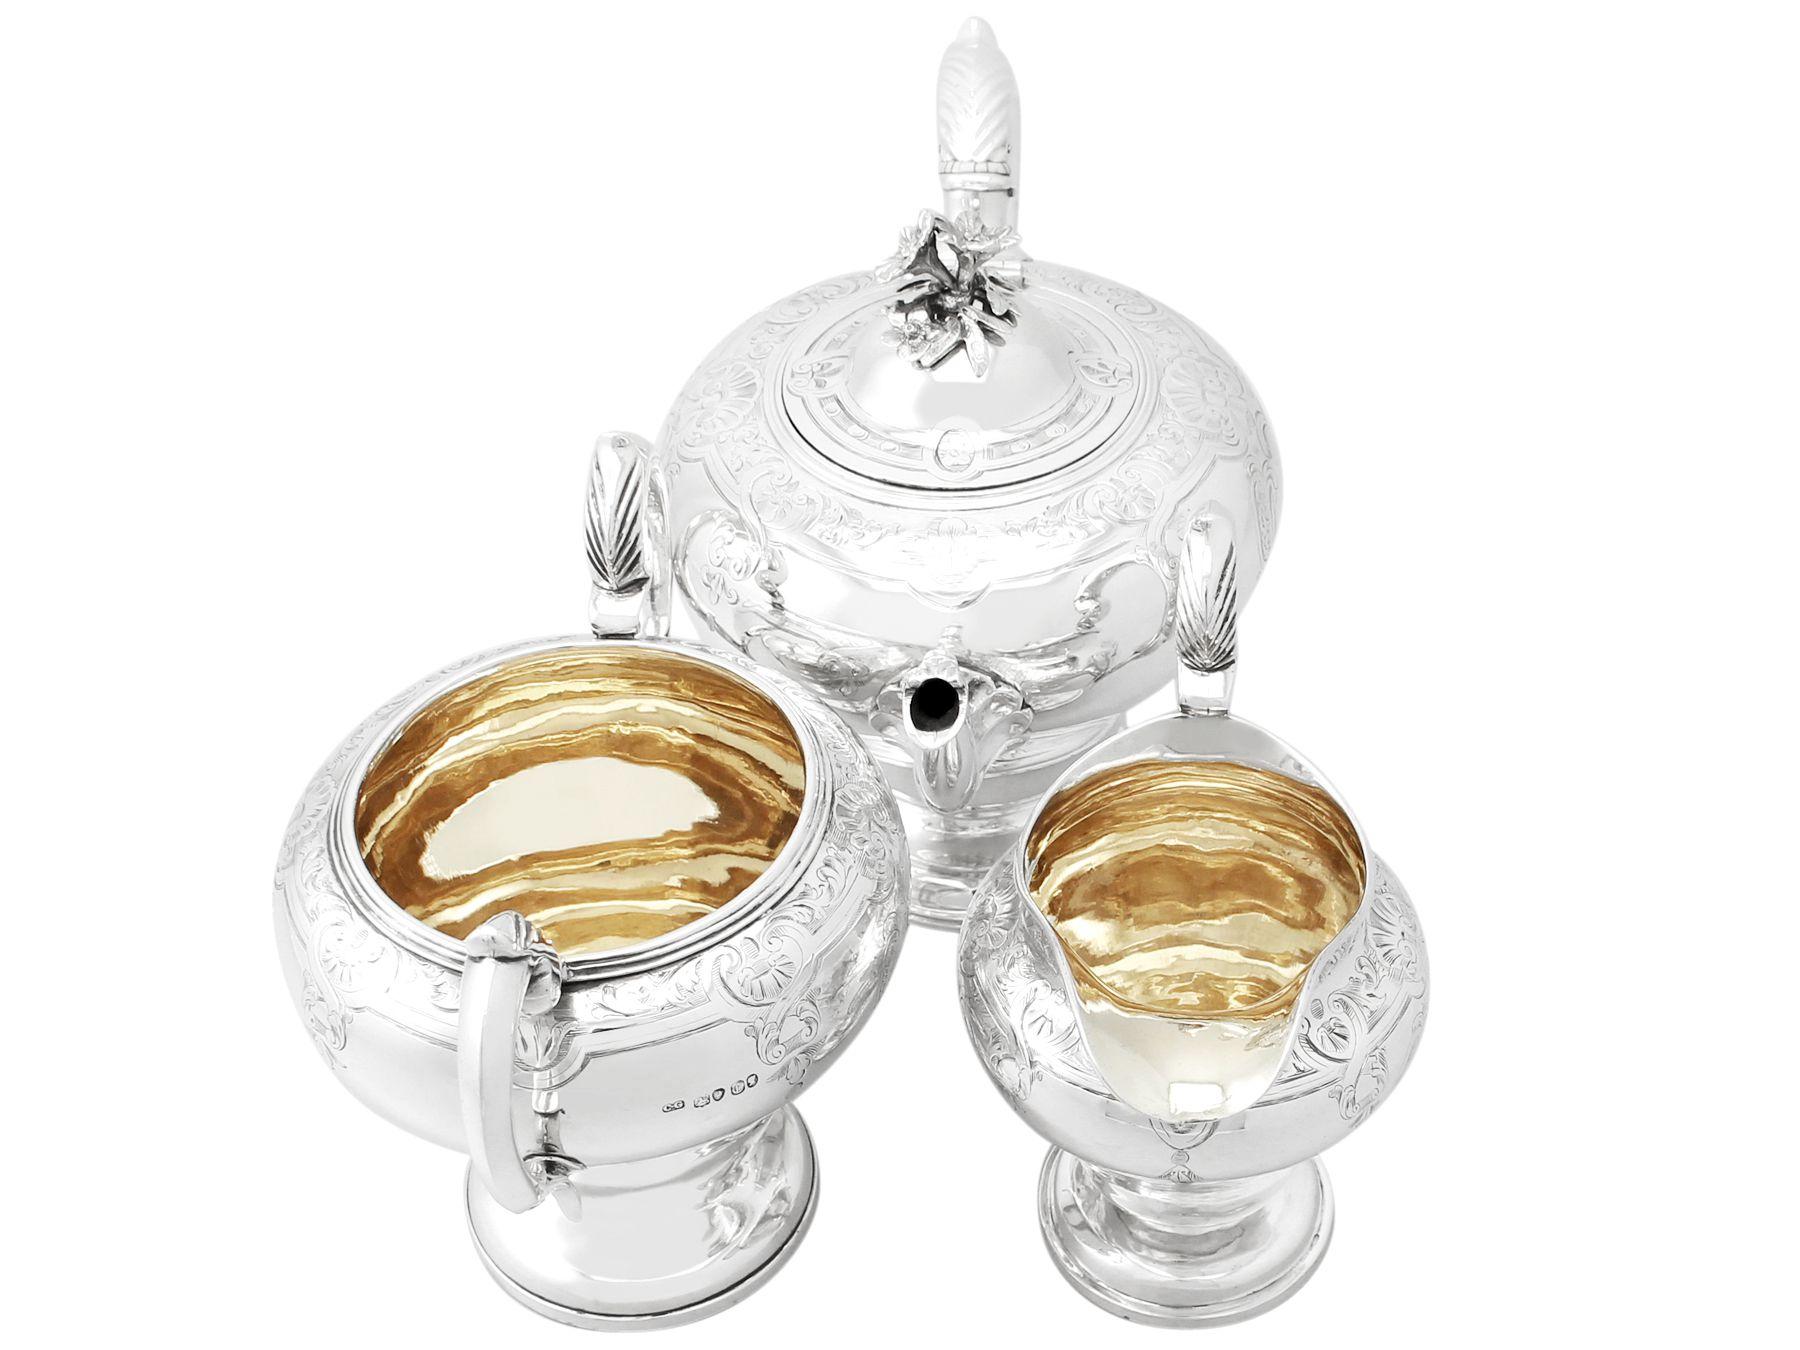 A fine and impressive antique Victorian sterling silver three piece tea service/set; part of our Victorian silver teaware collection.

This fine antique Victorian sterling silver three piece tea set consists of a teapot, sugar bowl and cream jug /